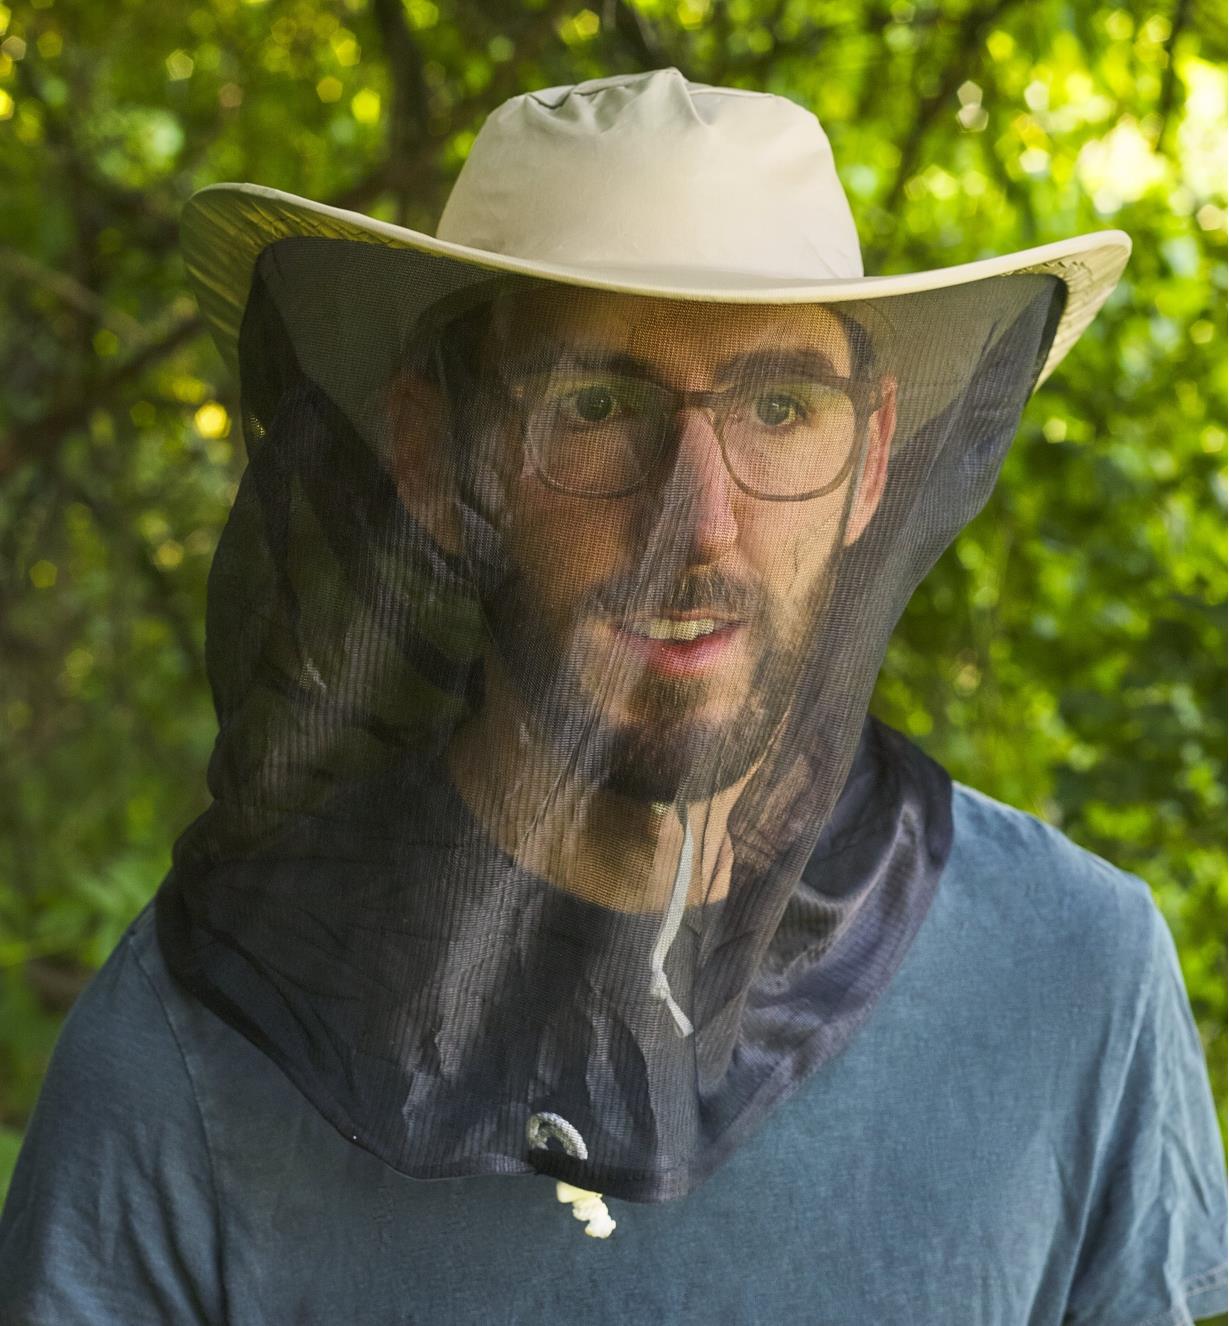 A man wearing a wide-brimmed hat with mosquito netting down over his face